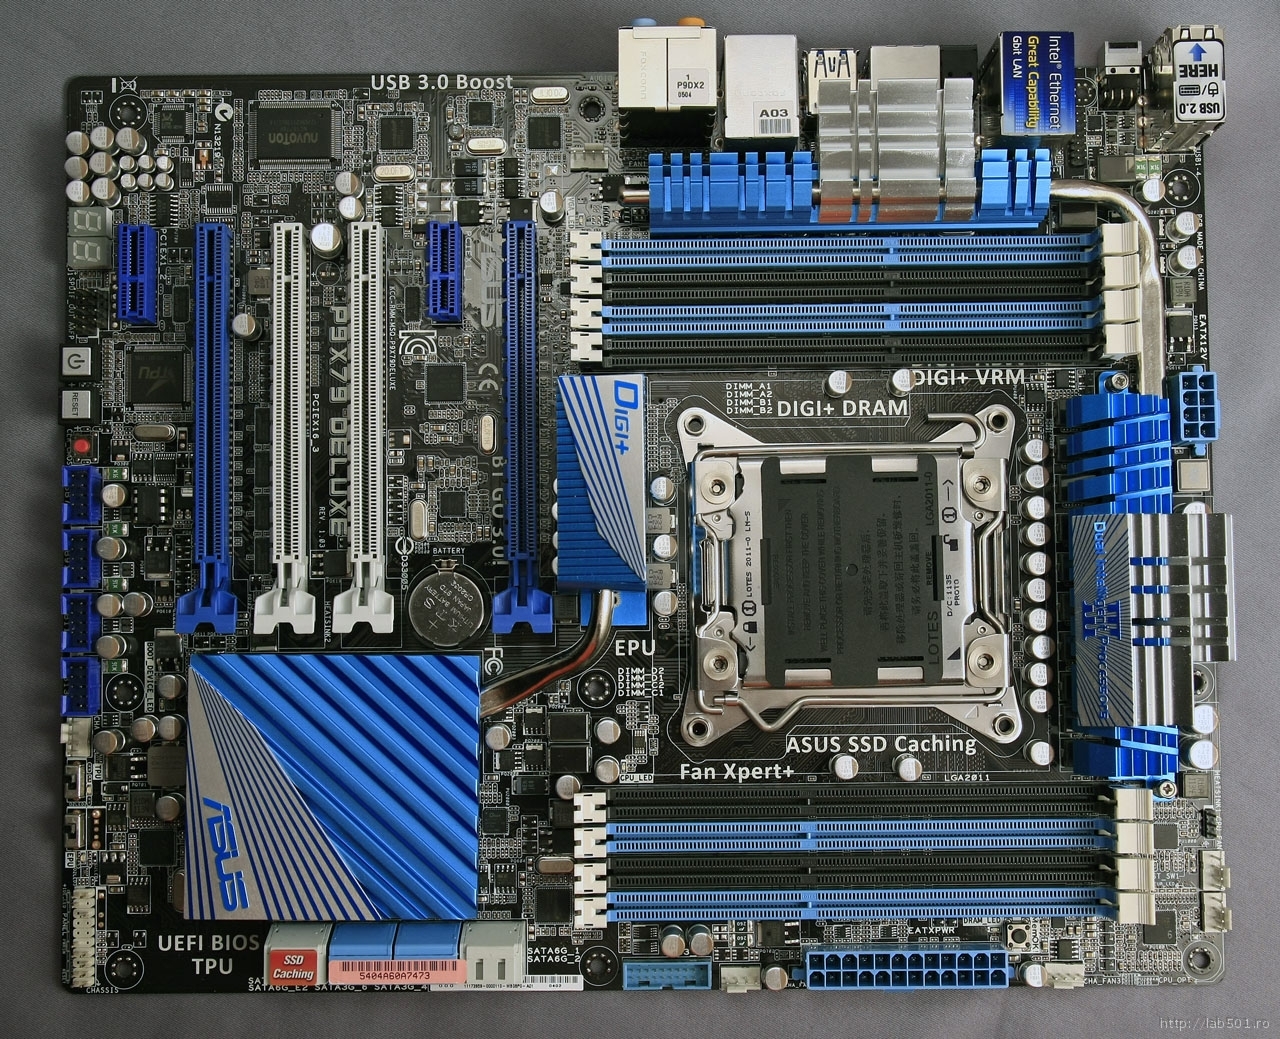 Сокет x79. ASUS x79 p9x79. ASUS p9x79 Deluxe. ASUS lga2011 p9x79 Pro. P9x79le сокет.